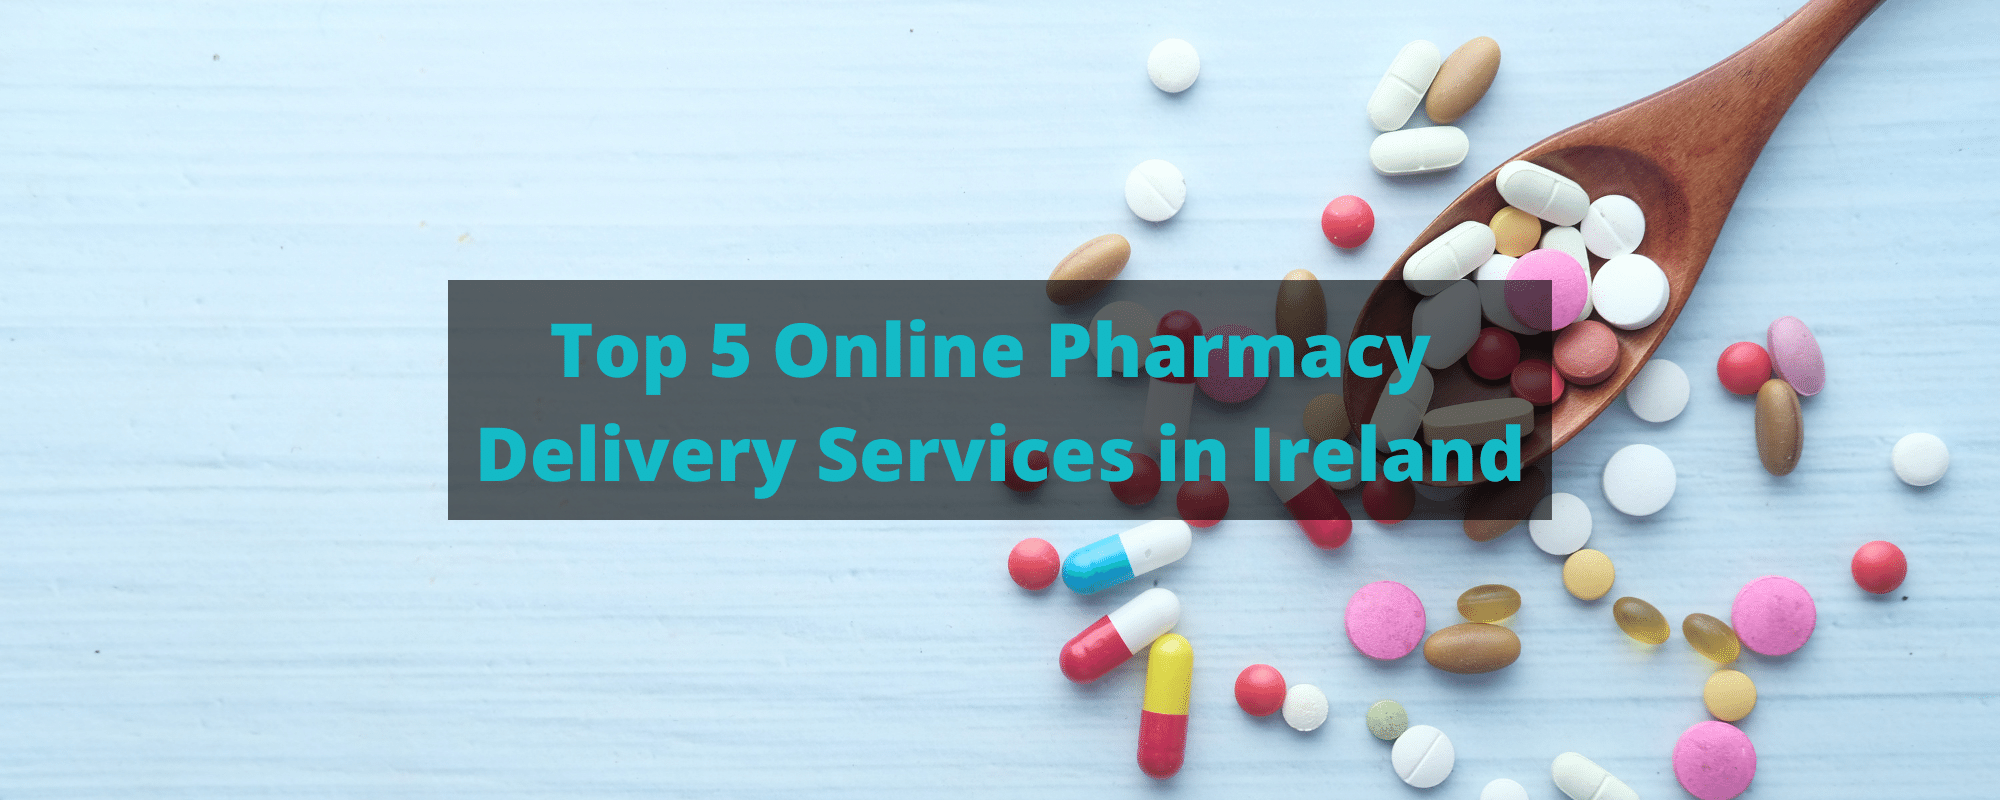 online pharmacy delivery services in ireland